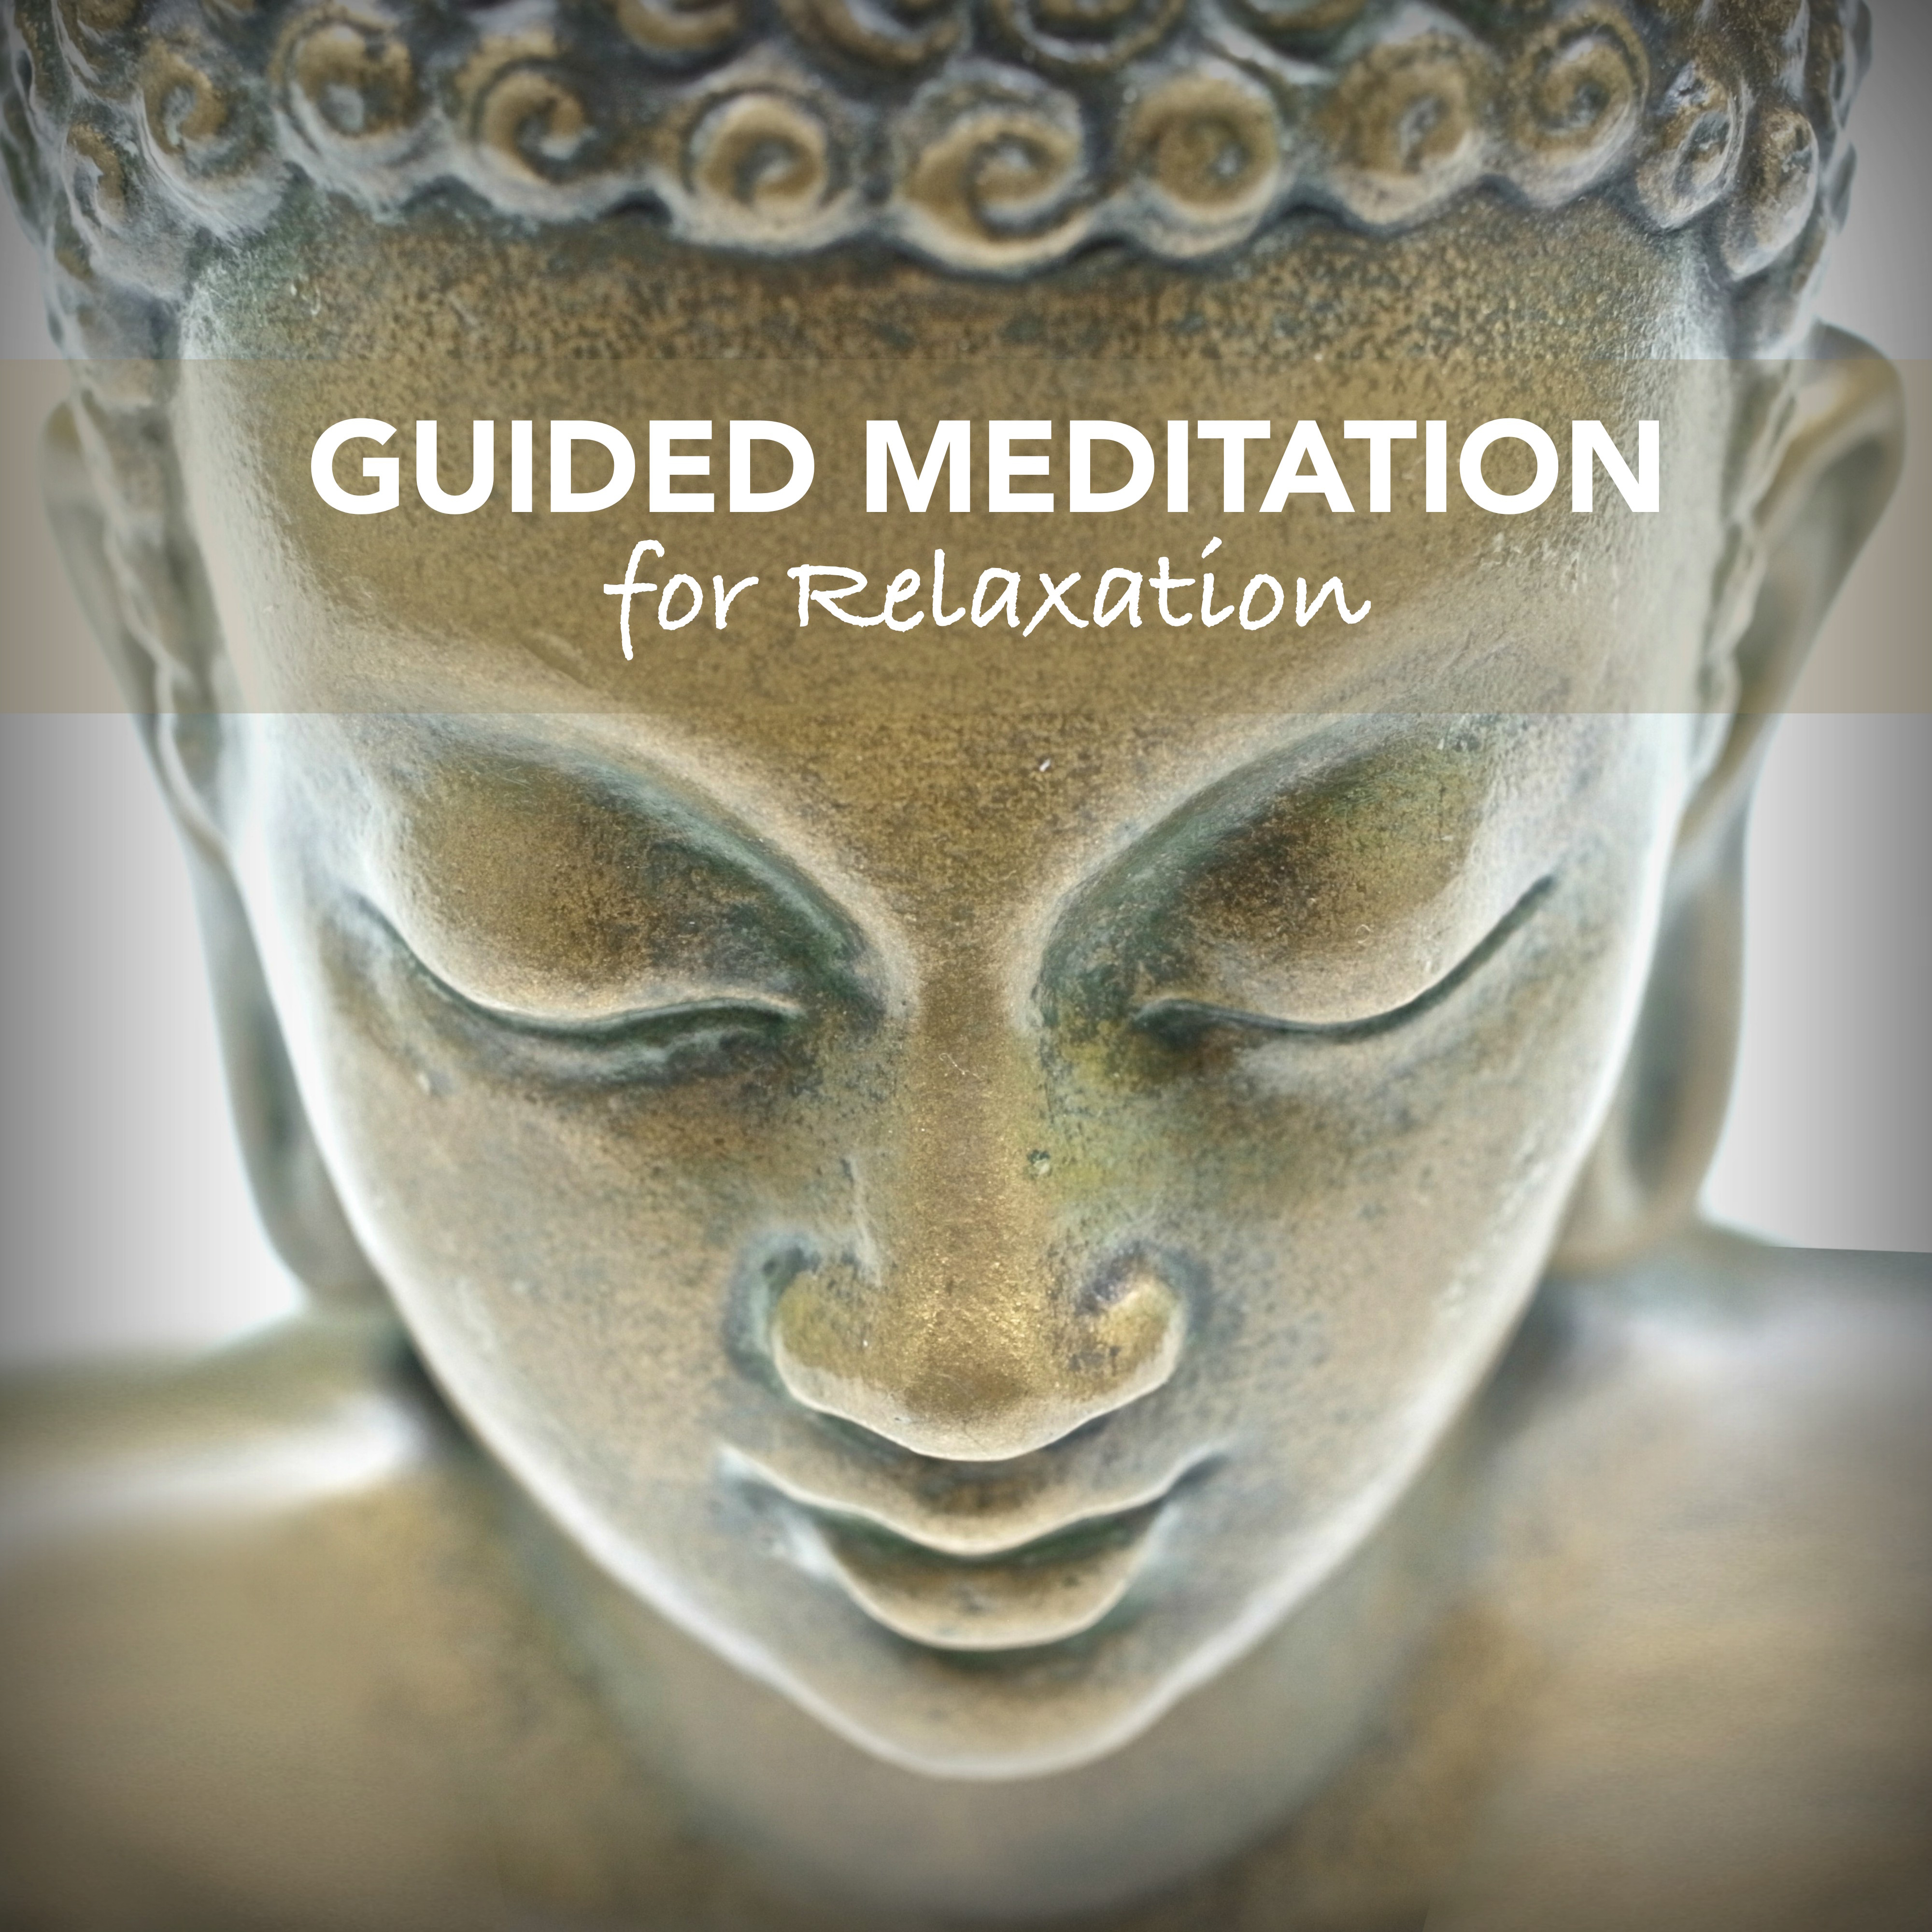 Guided Meditation for Deep Relaxation - Guided Meditation Audio & Relaxing Sleep Music to Ease Stress and Calm your Nerves